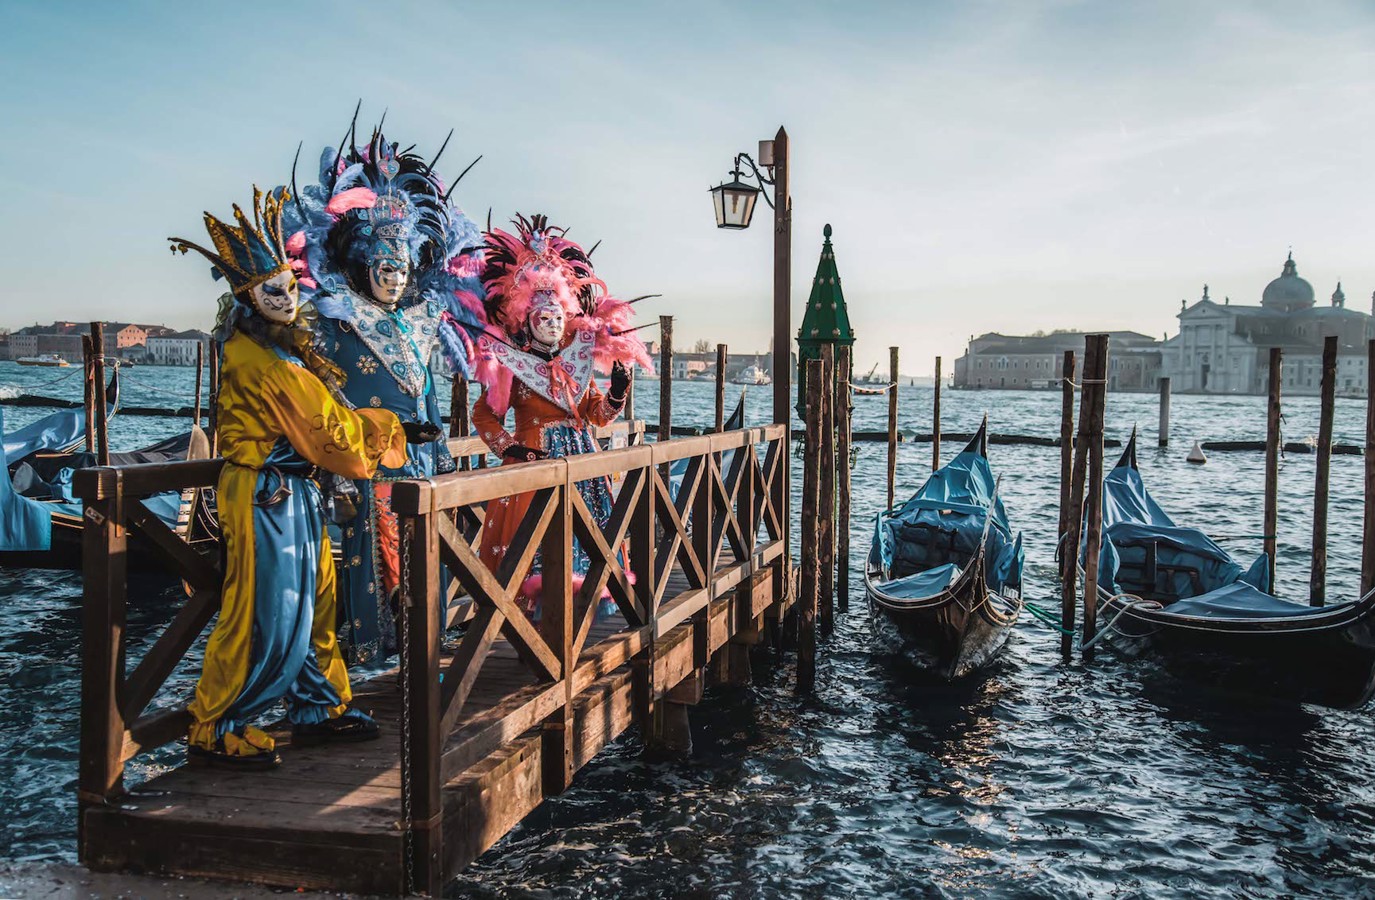 Main Exhibitions And Events In Venice In 2020